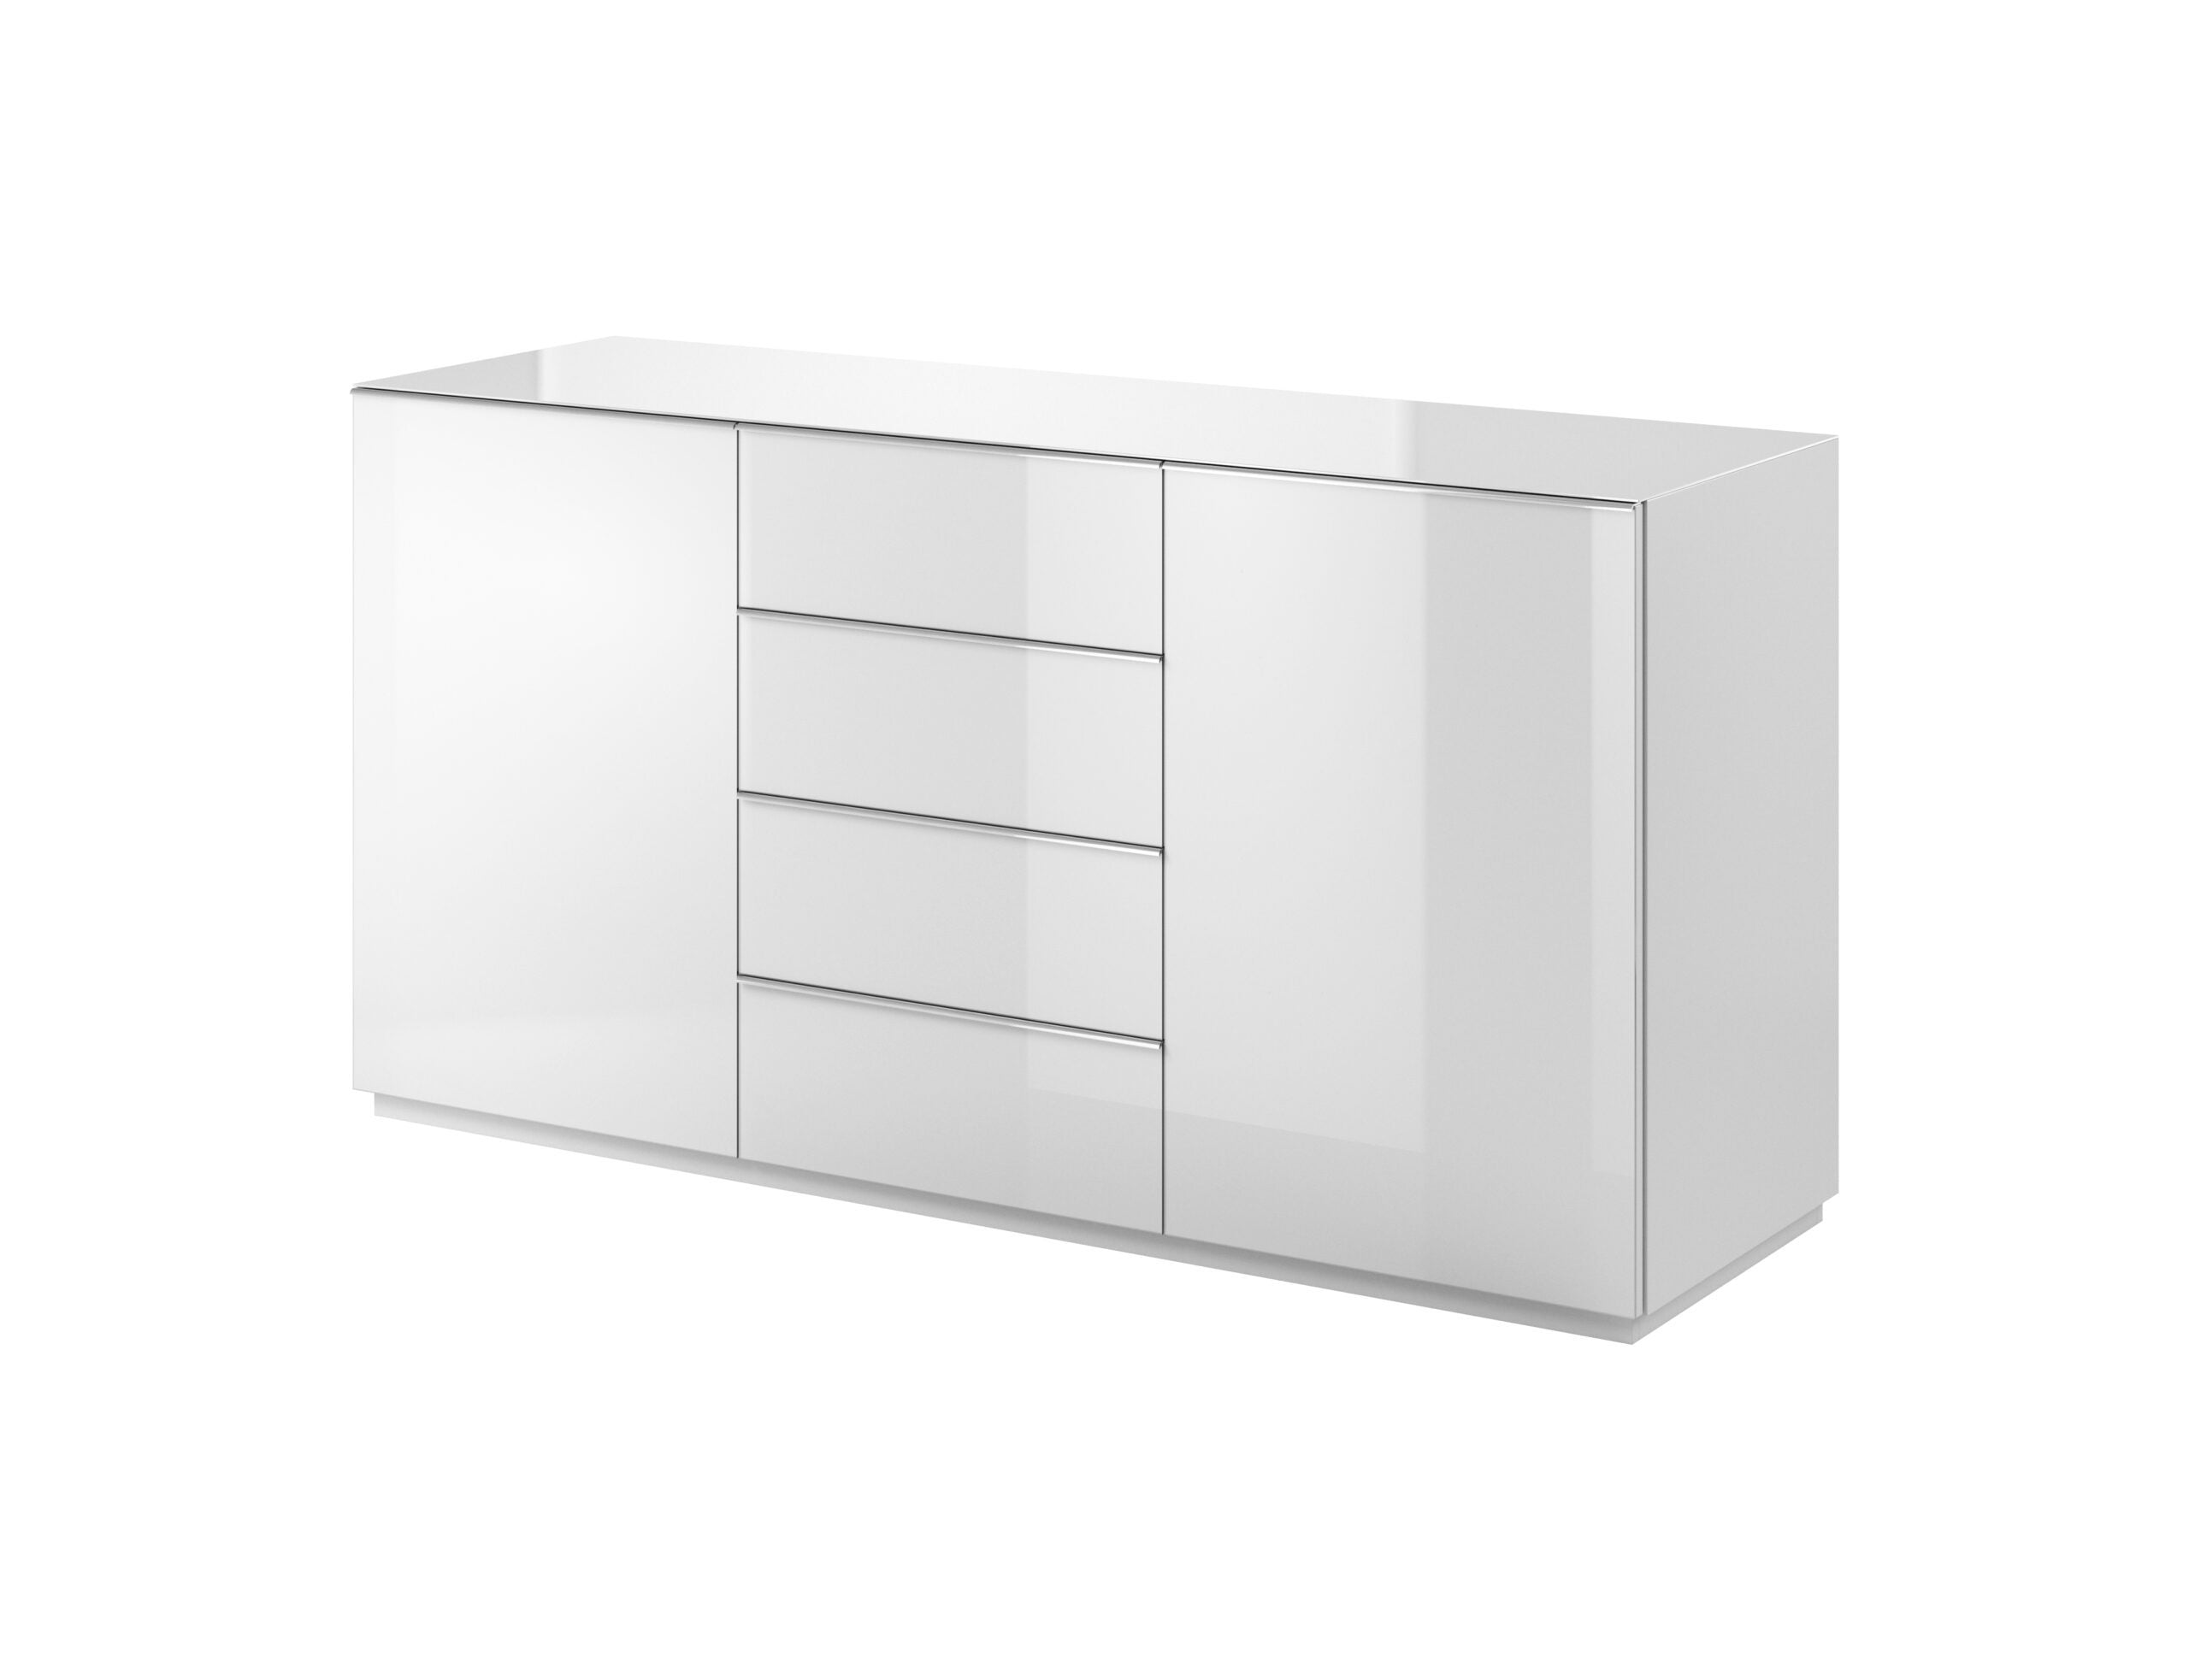 View Helio 26 Sideboard Cabinet White Glass 160cm information